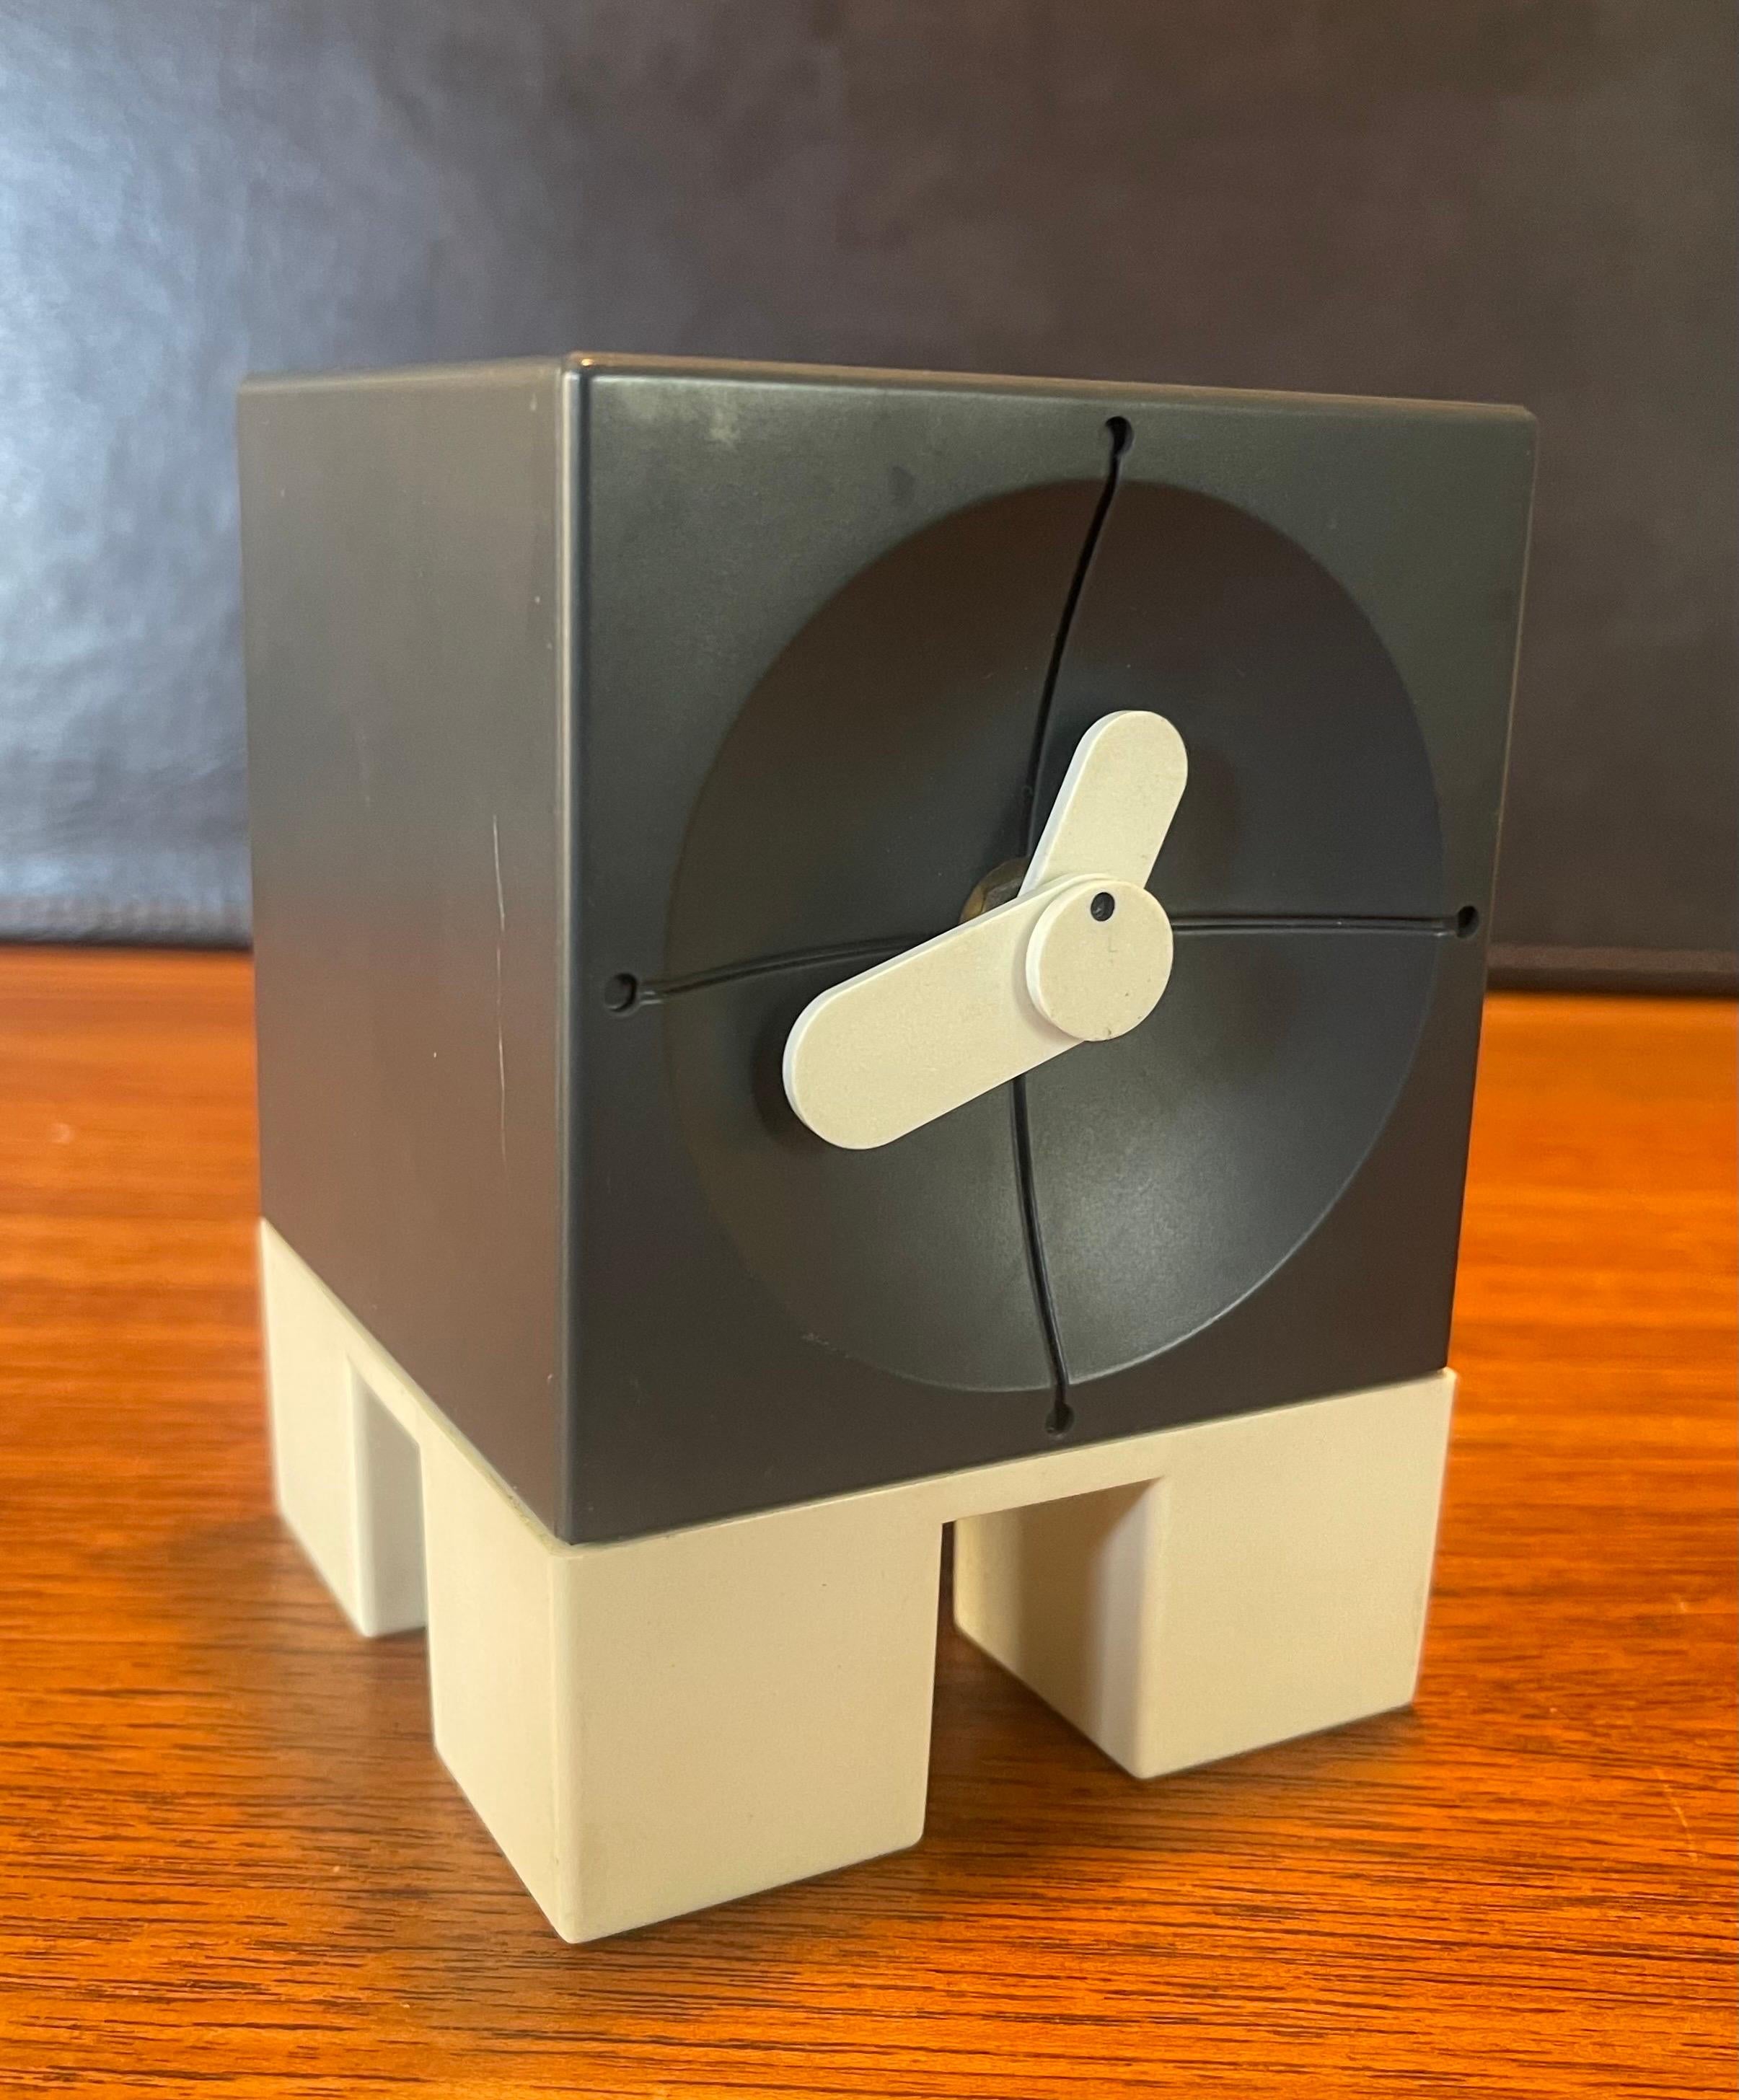 A very cool post-modern desk clock by ETC USA, circa 1980s. The piece has a great minimalist look and is in very good condition with no chips or cracks. It is battery-operated quartz movement and measures 3.5